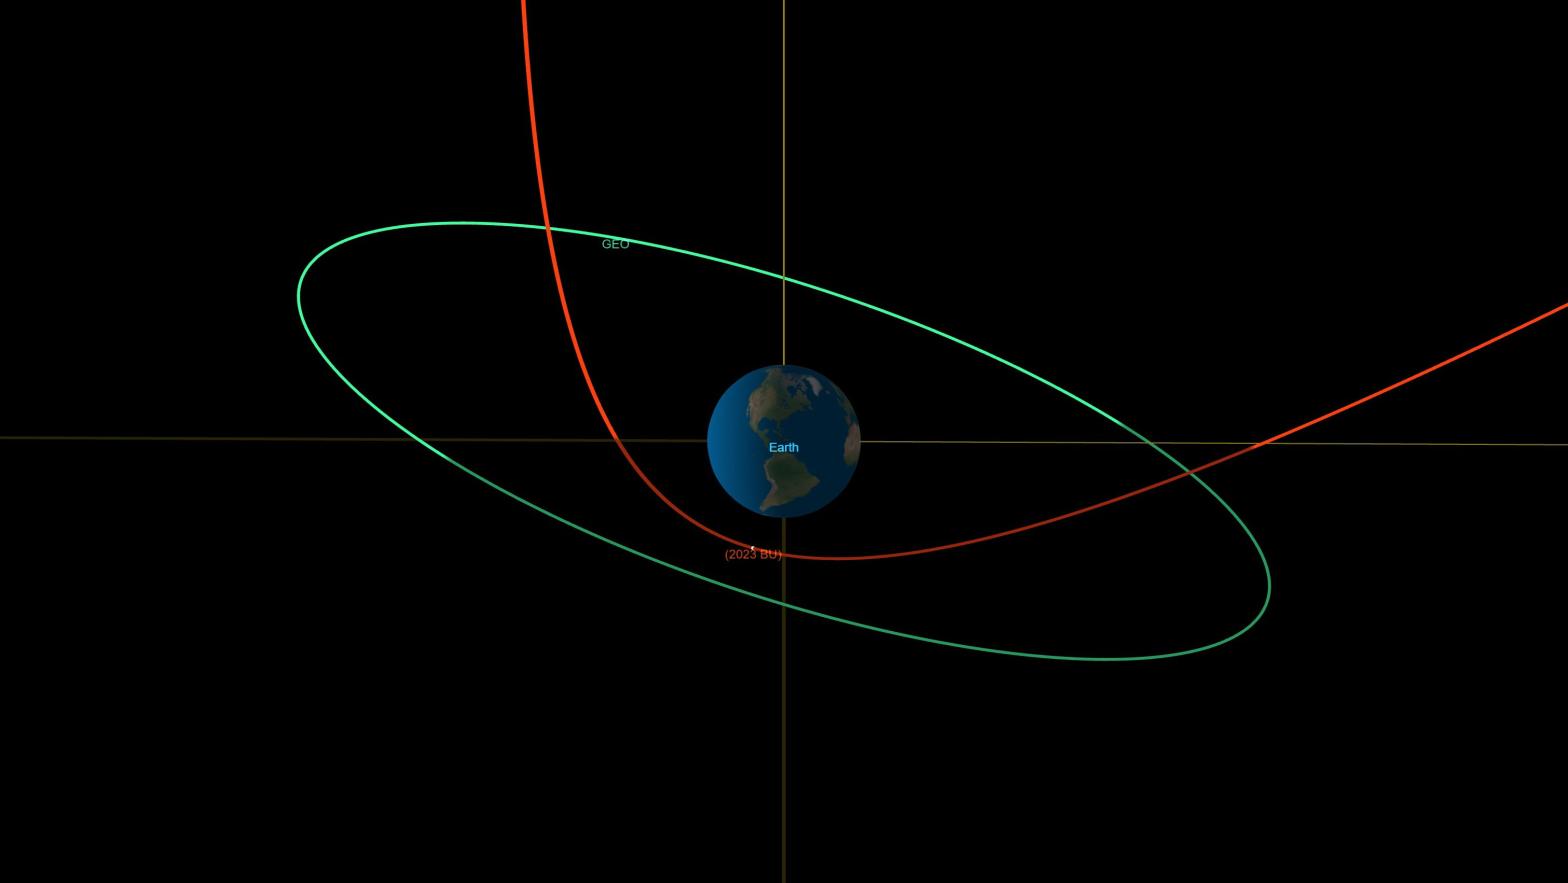 2023 BU will pass over the southern tip of South America on January 26.  (Illustration: NASA/JPL-Caltech)